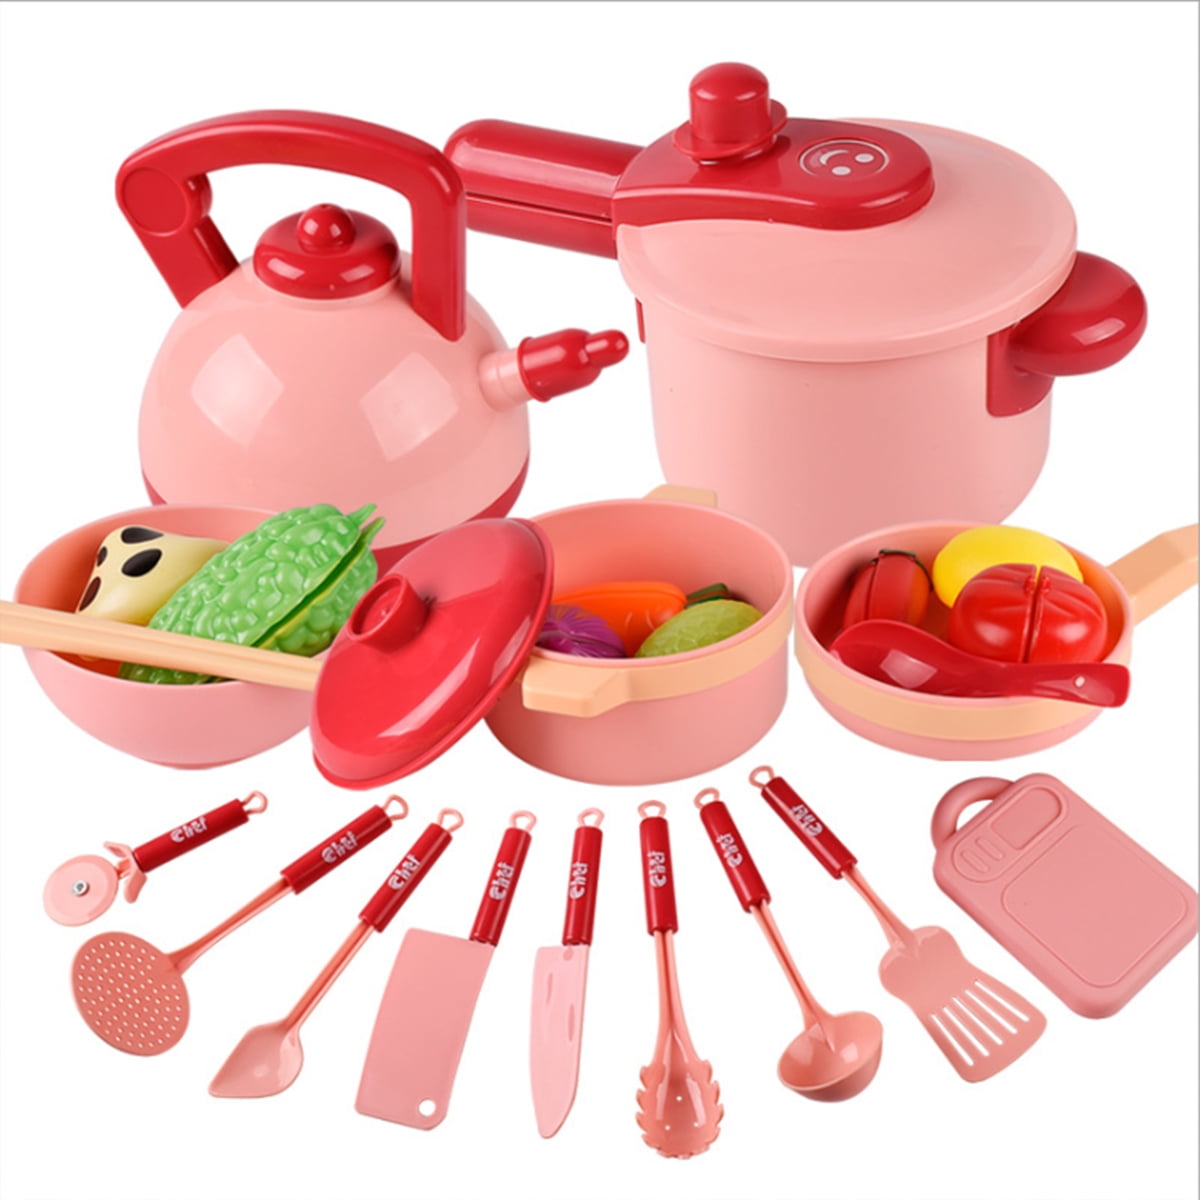 16Pcs Kid Play House Toy Kitchen Utensils Cooking Pots Pans Food Dishes Cookware 